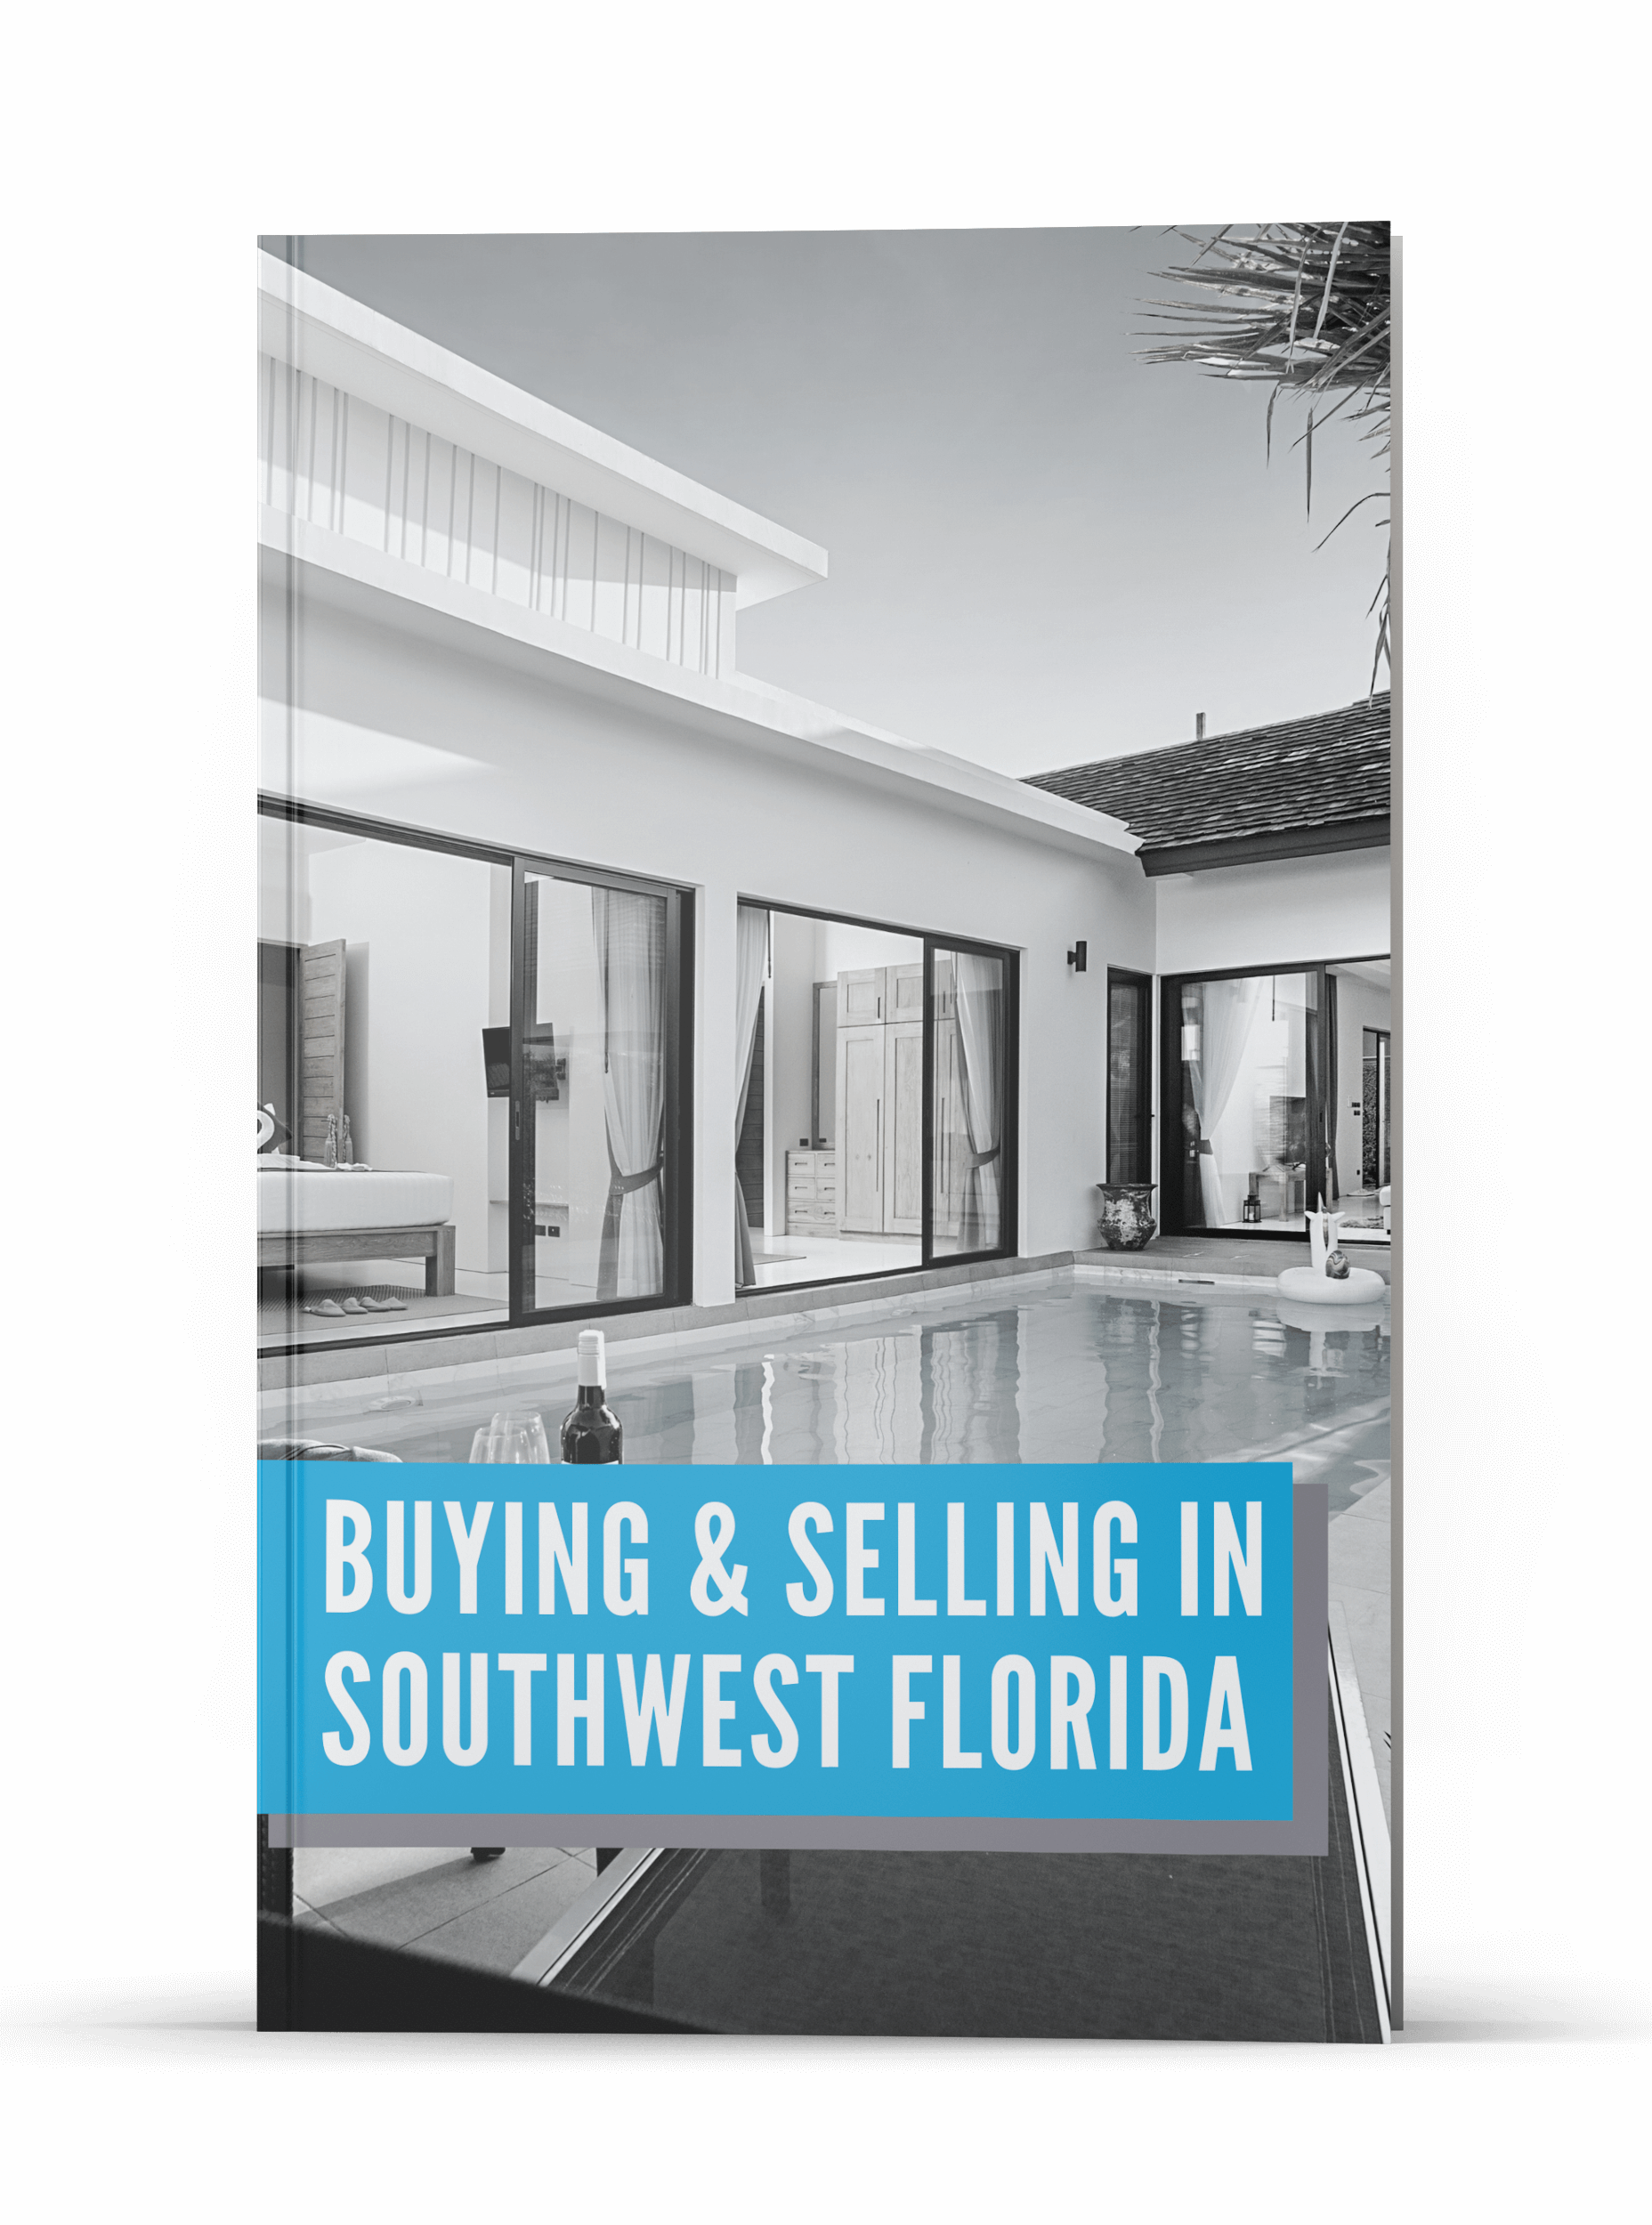 Sonja Pound | Buying & Selling in SWFL | Realtor